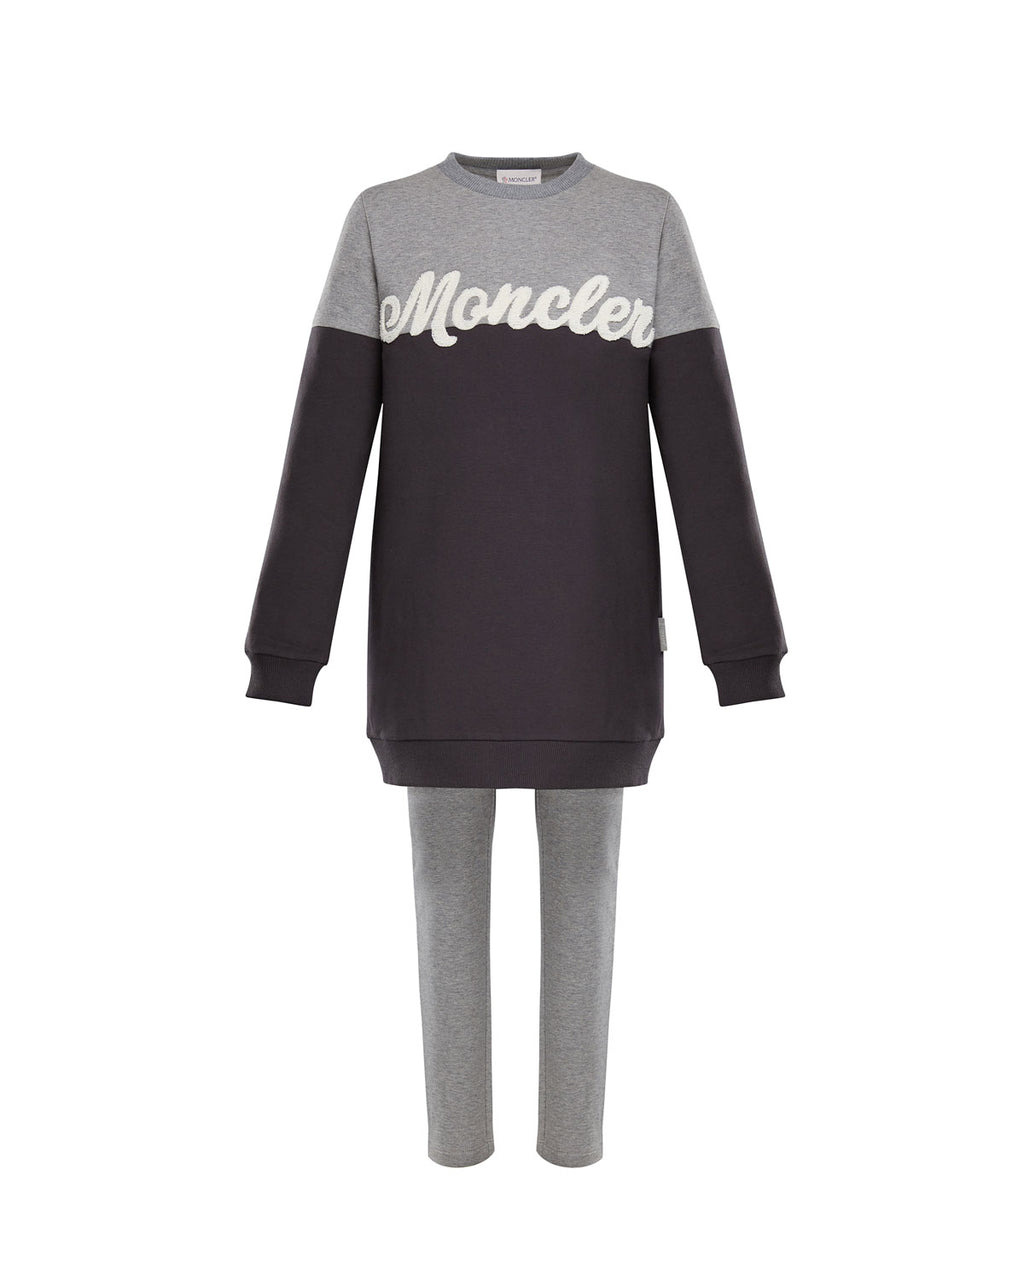 Moncler Two-Tone Logo Sweater and Leggings Set / Tracksuit